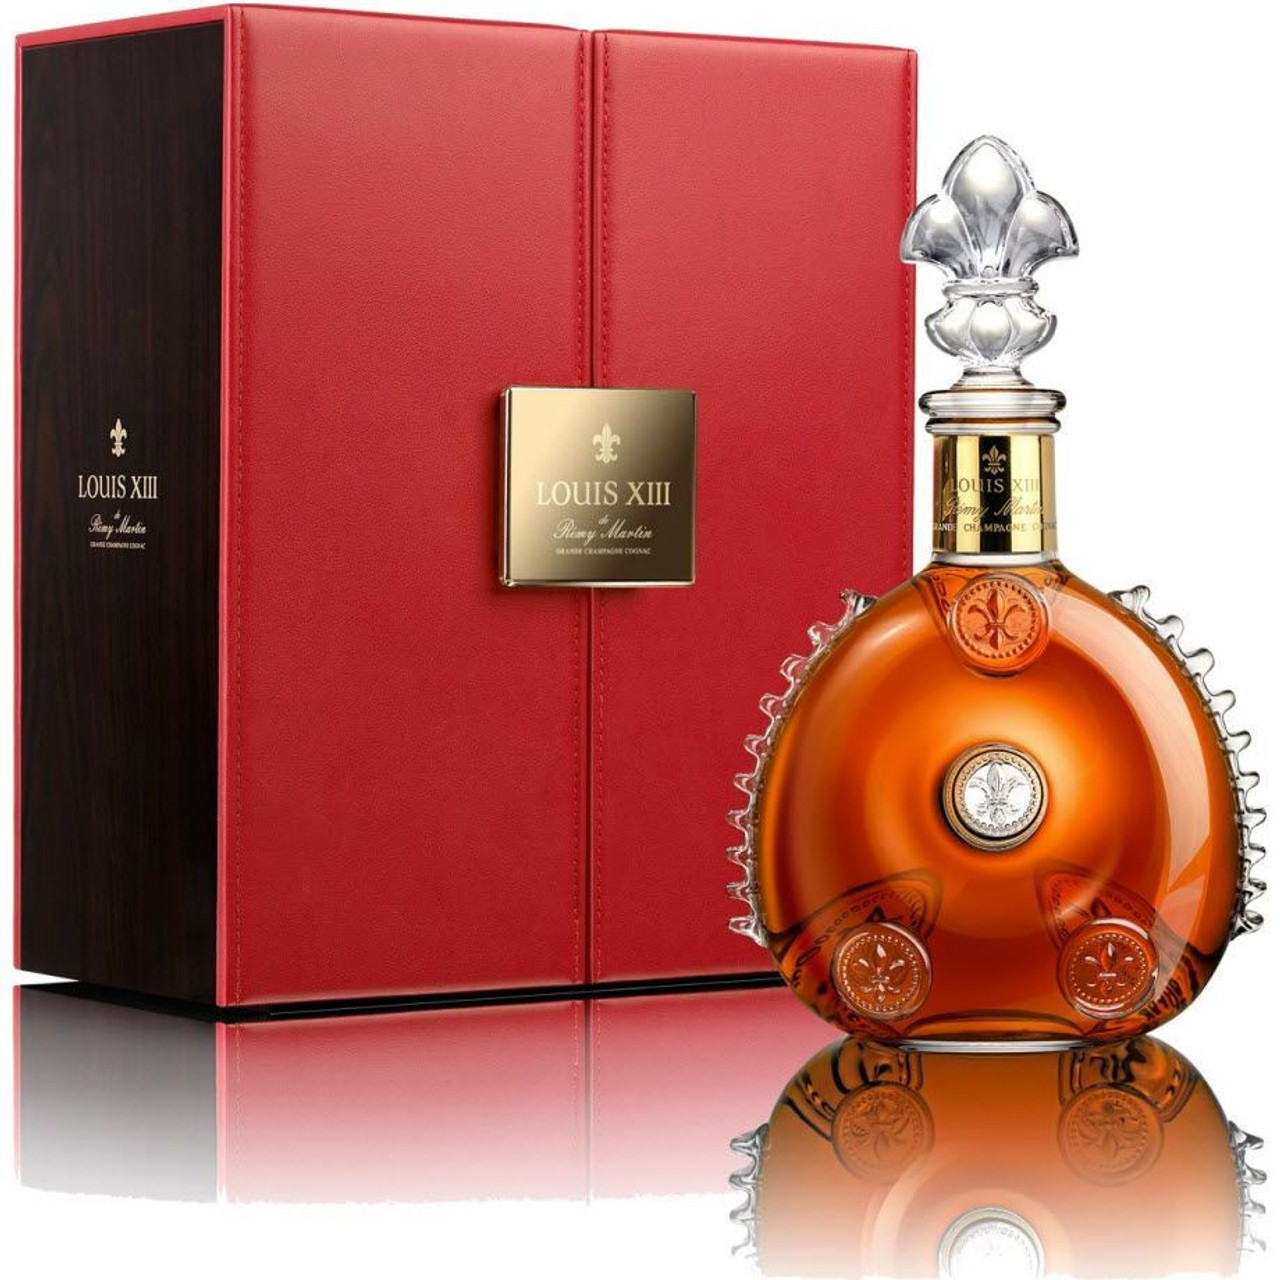 Rémy Martin Louis XIII Cognac Grande Champagne with Giftbox 700mL